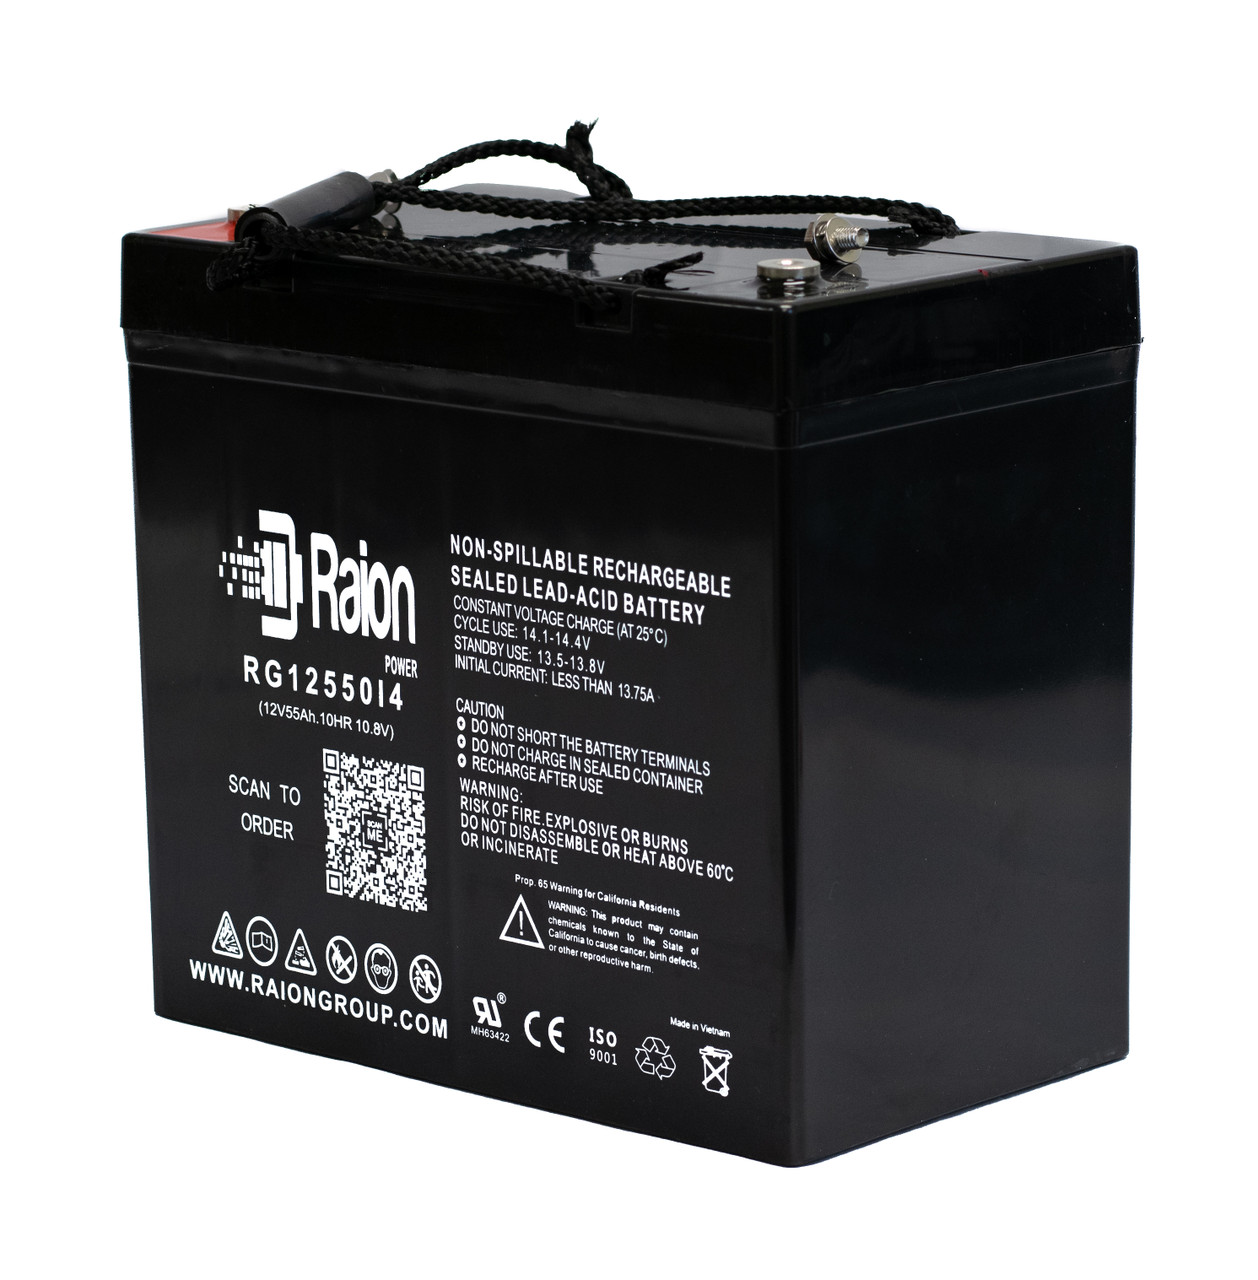 Raion Power 12V 55Ah 22NF Mobility Scooter Battery Replacement for Golden Technologies Alante GP201